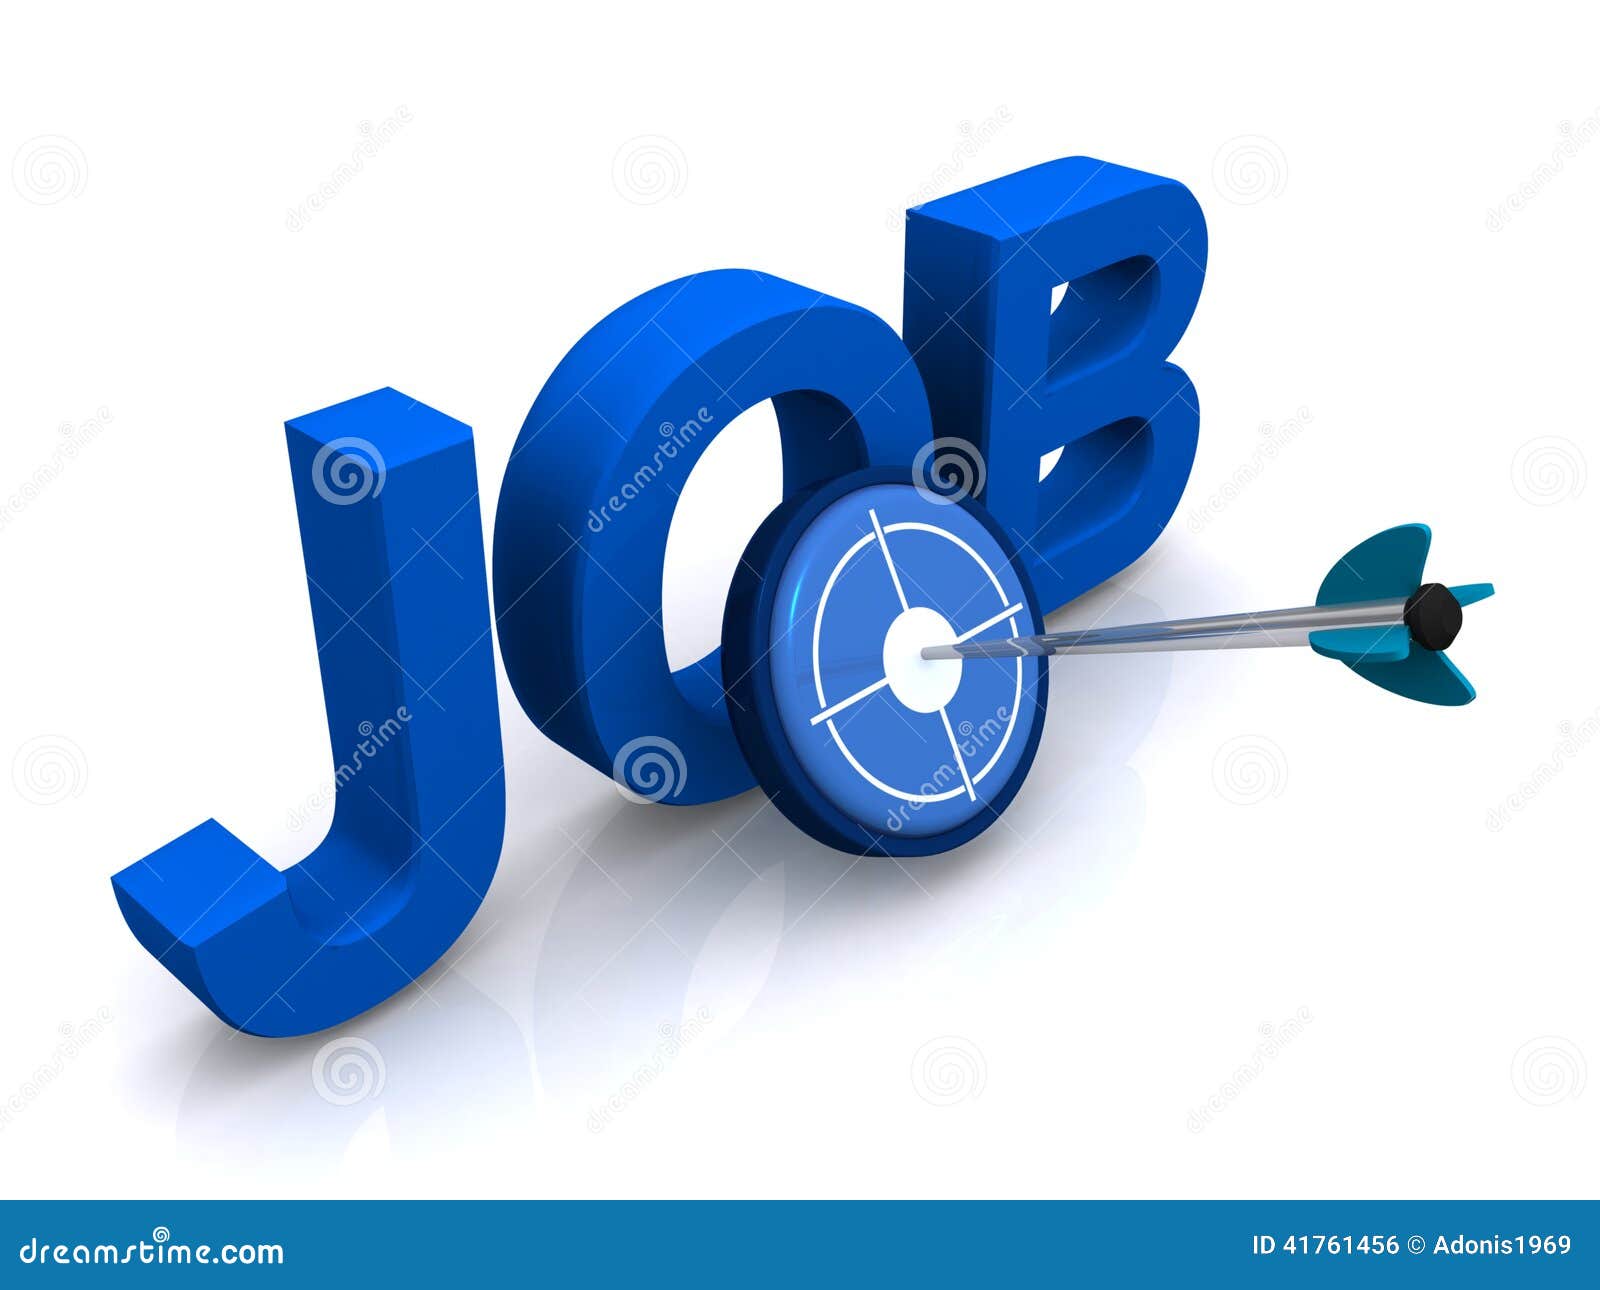 Care Assistant required for disabled lady in the Shildon area @ £12/hr Job UKCIL Shildon